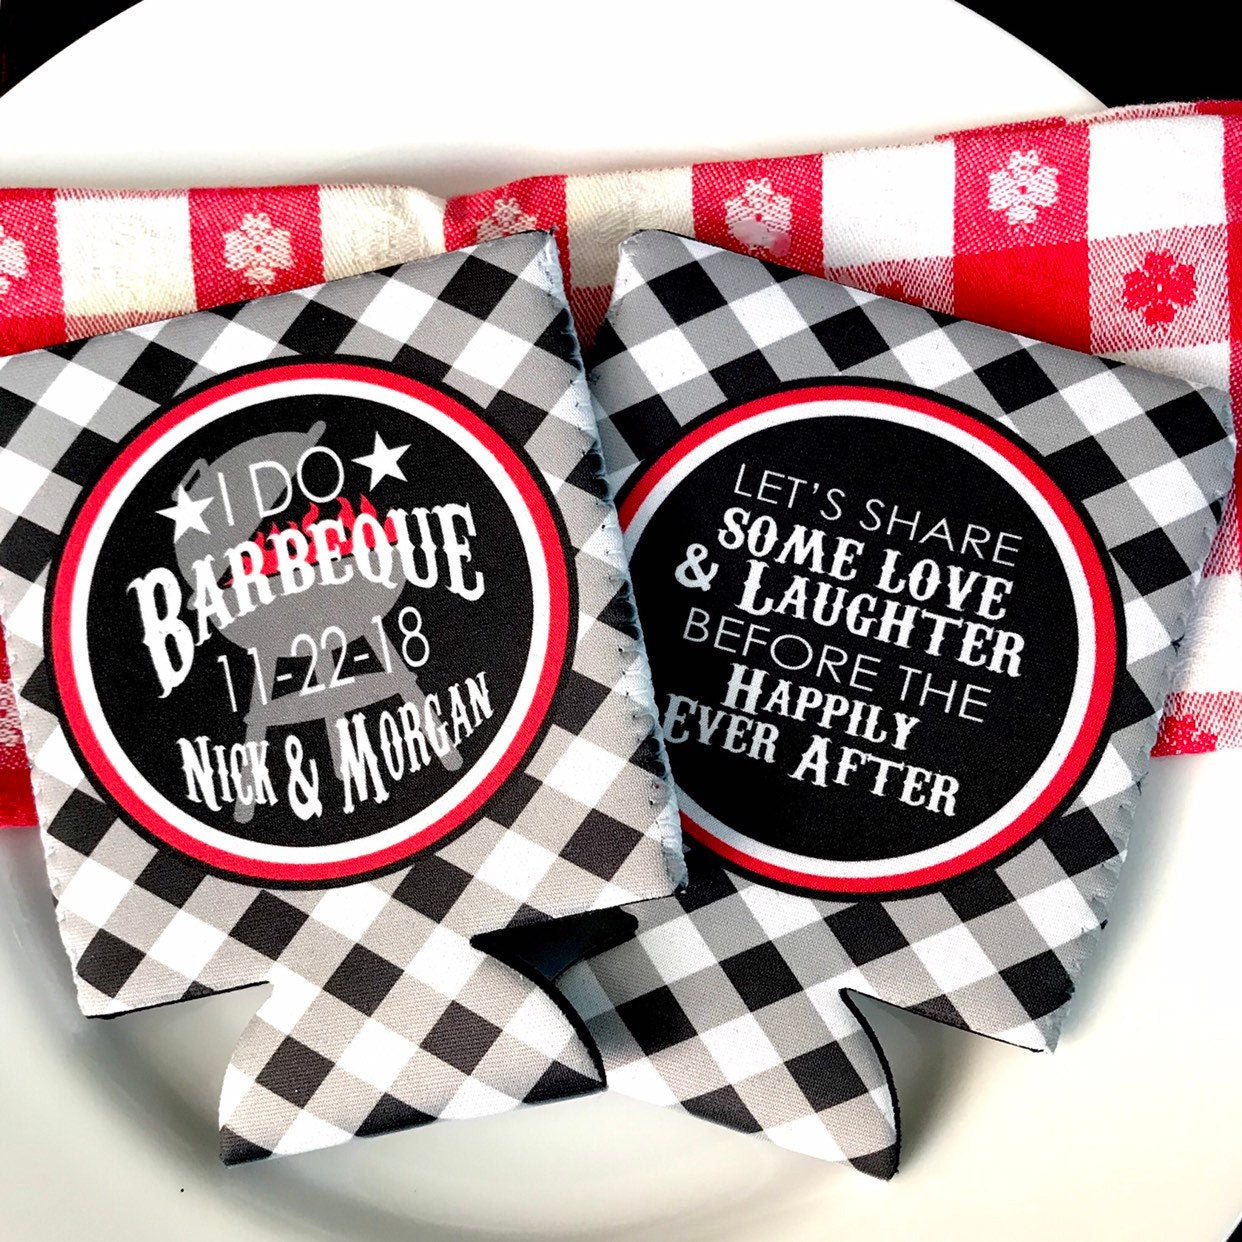 Gingham Party Huggers. BBQ Wedding Shower Favors. BBQ Party Favors. Engagement Party Favors. Personalized Barbeque Shower Favors!